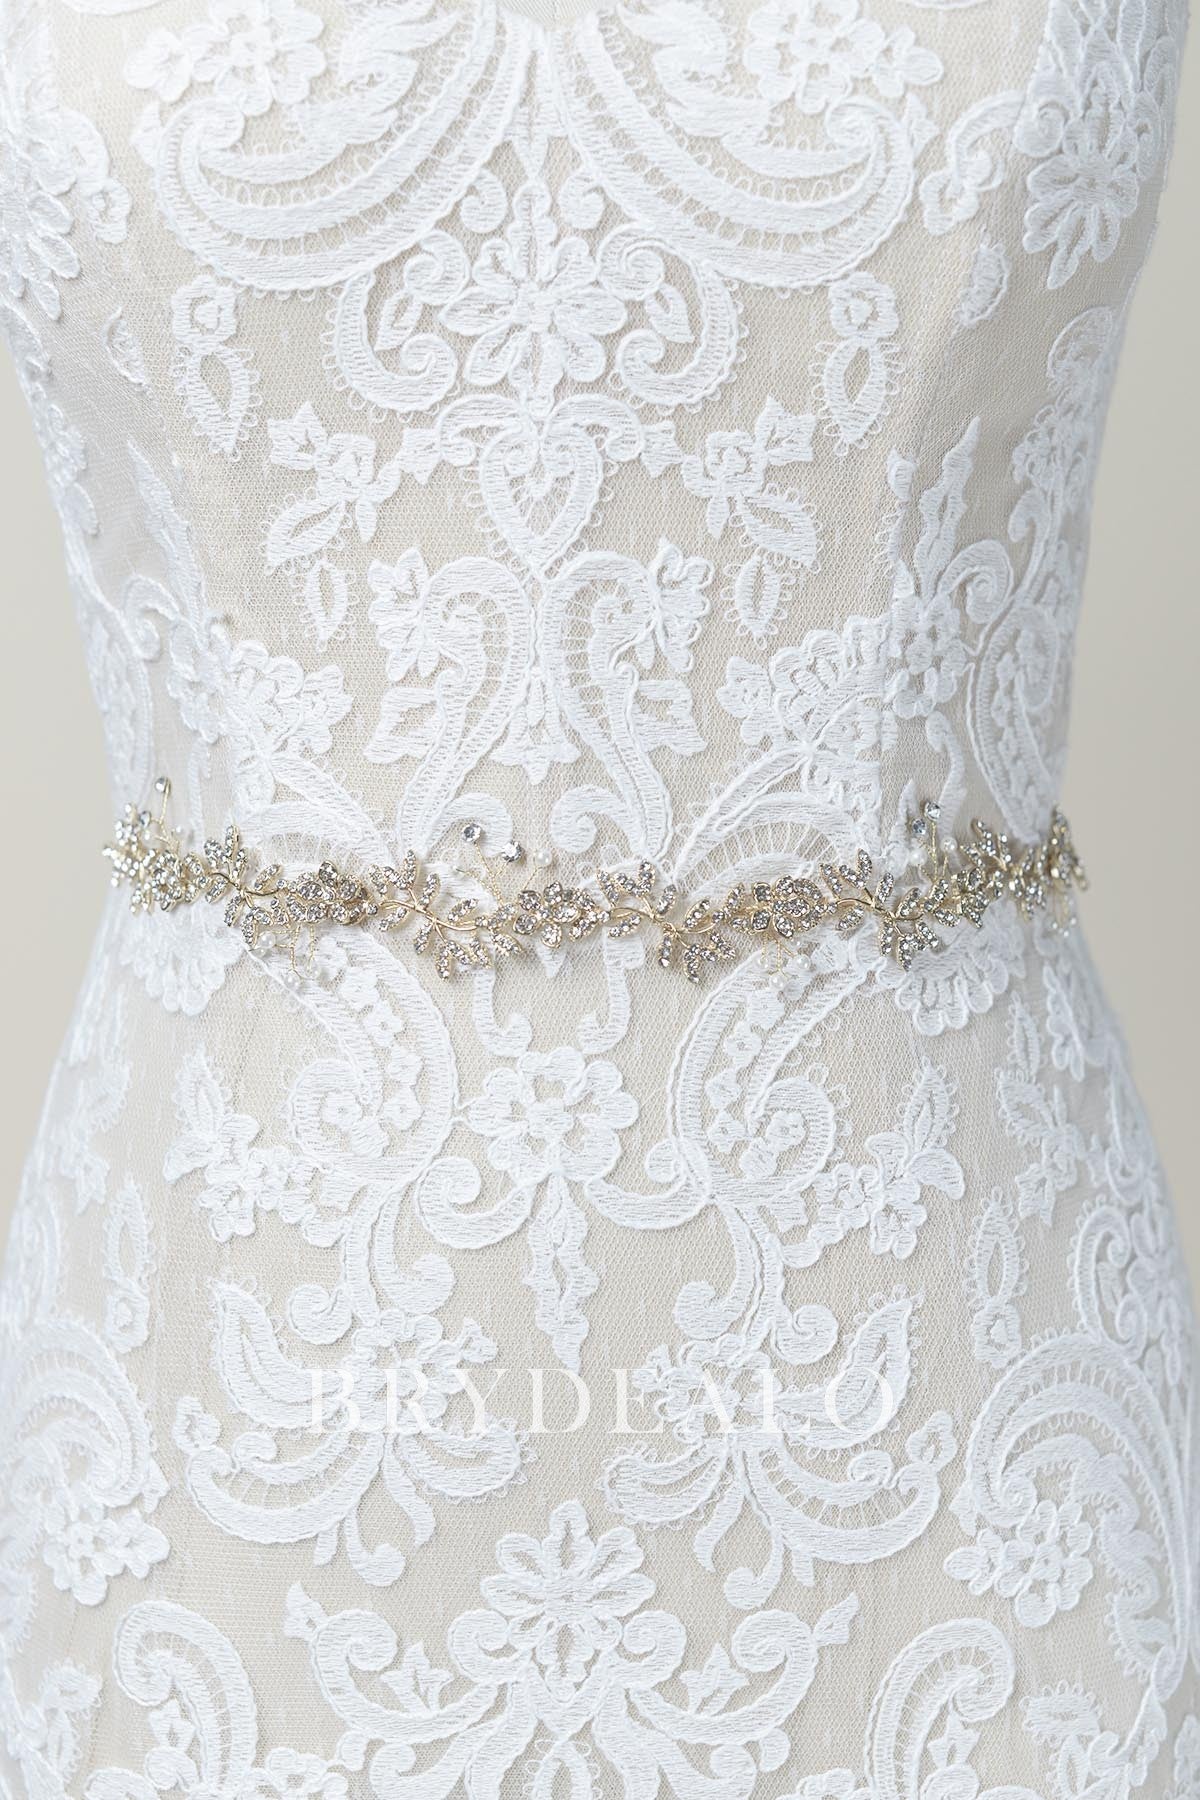 Wholesale Golden Vine Bridal Sash with Crystals and Pearls